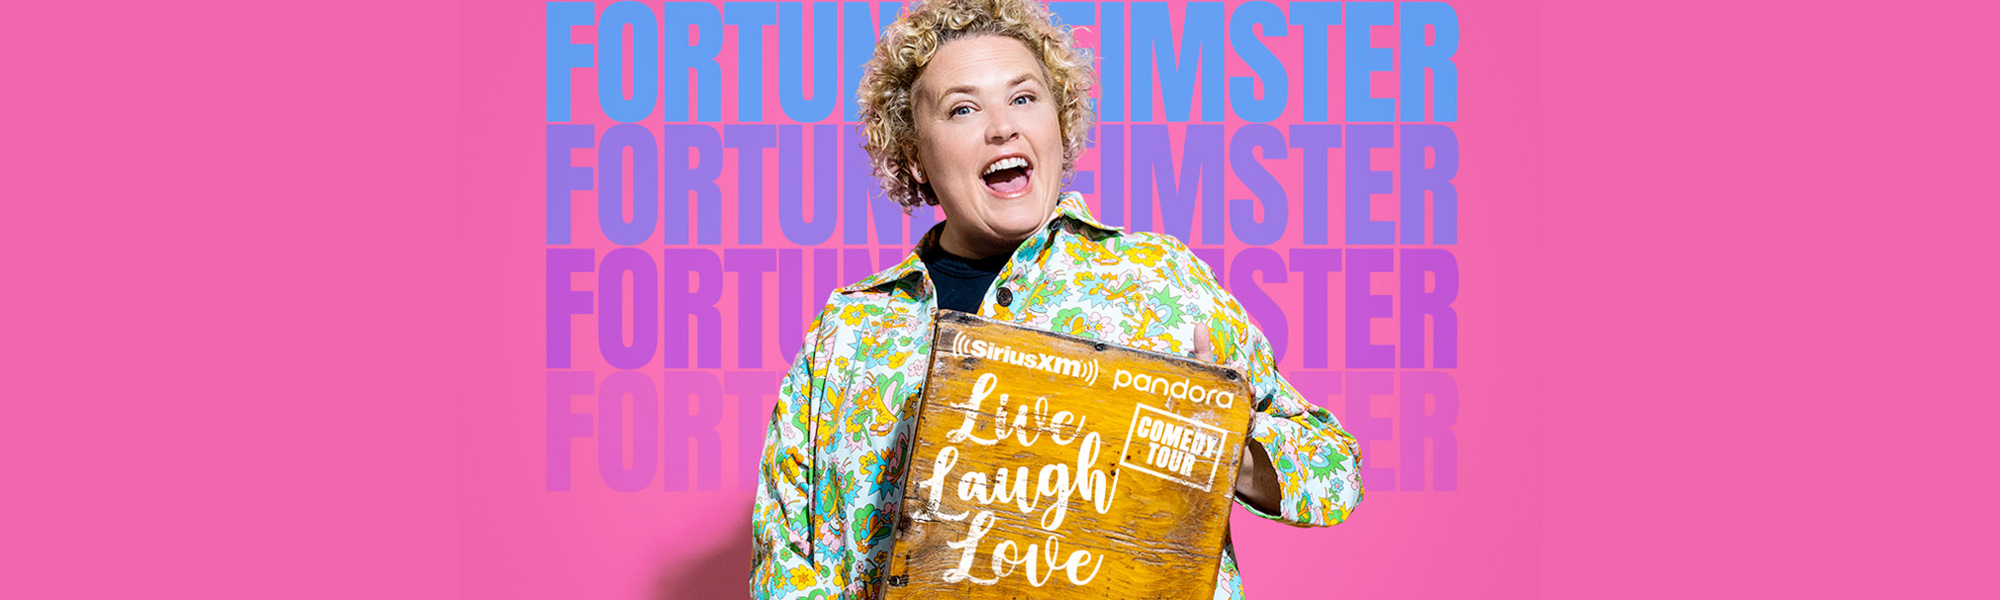 Comedian Fortune Feimster holding a wooden sign showing the words Live Laugh Love Comedy Tour on SiriusXM and Pandora.